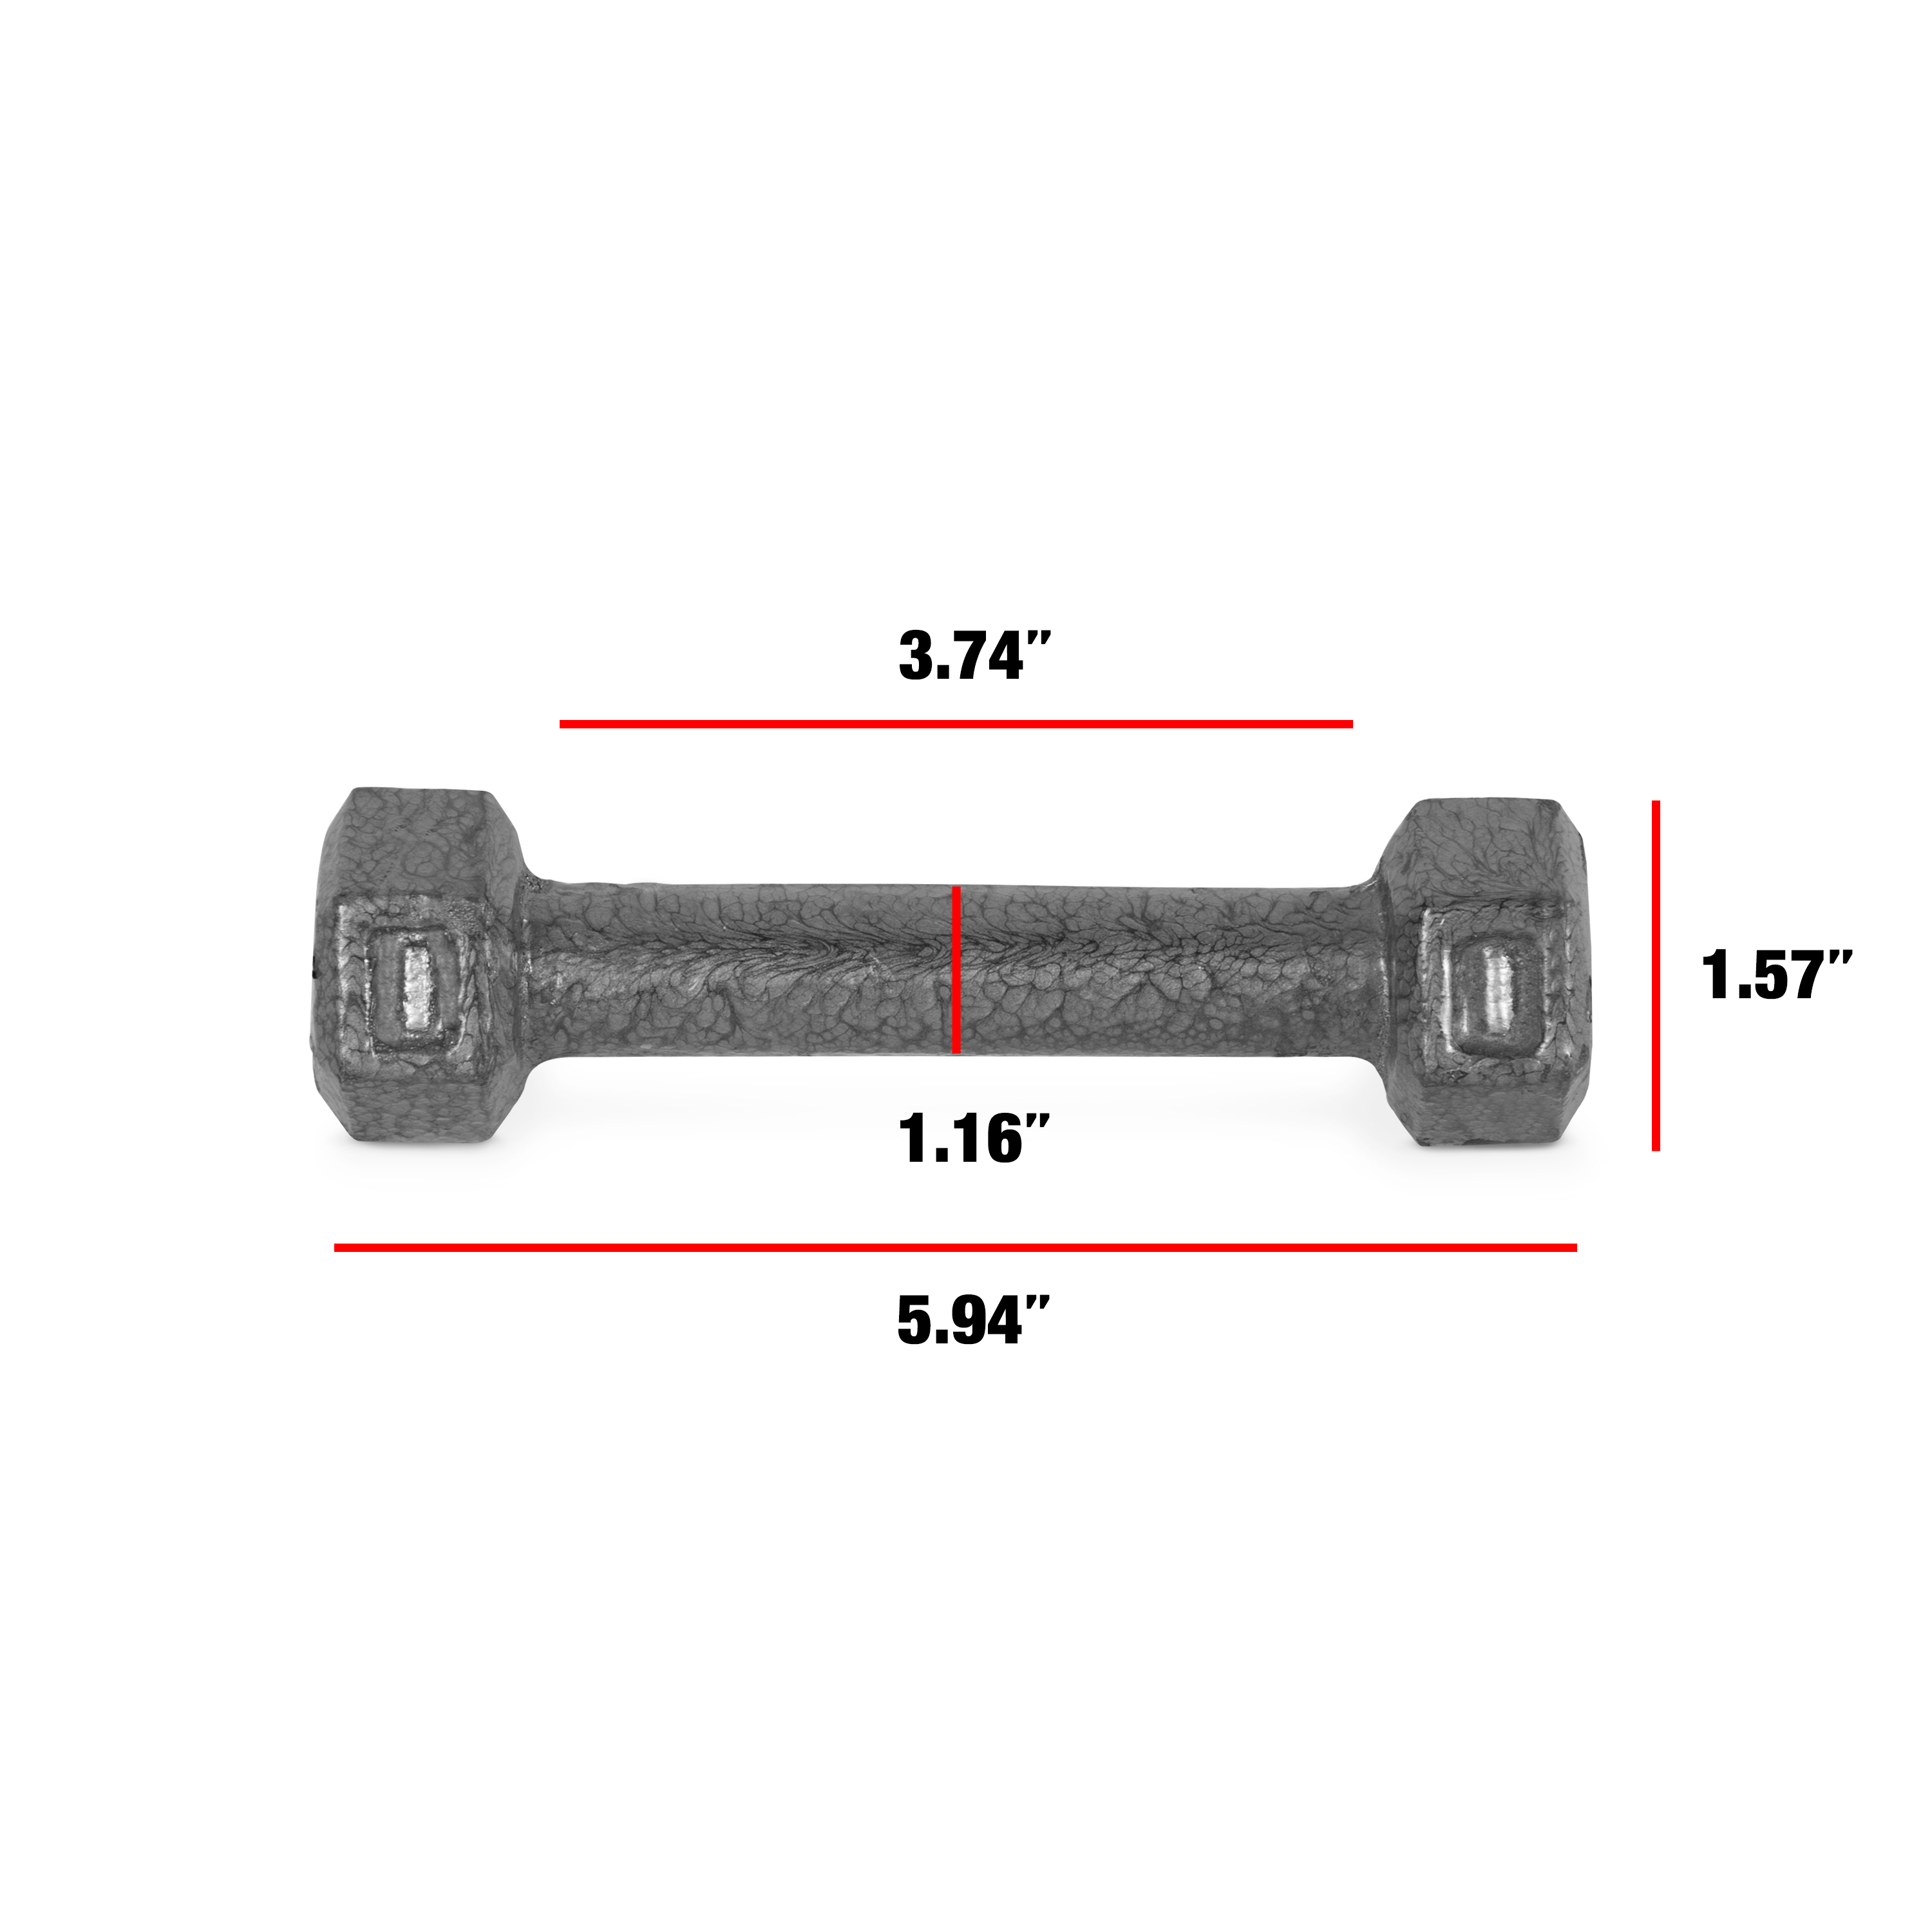 CAP Barbell 1lb Cast Iron Hex Dumbbell, Single - image 3 of 6